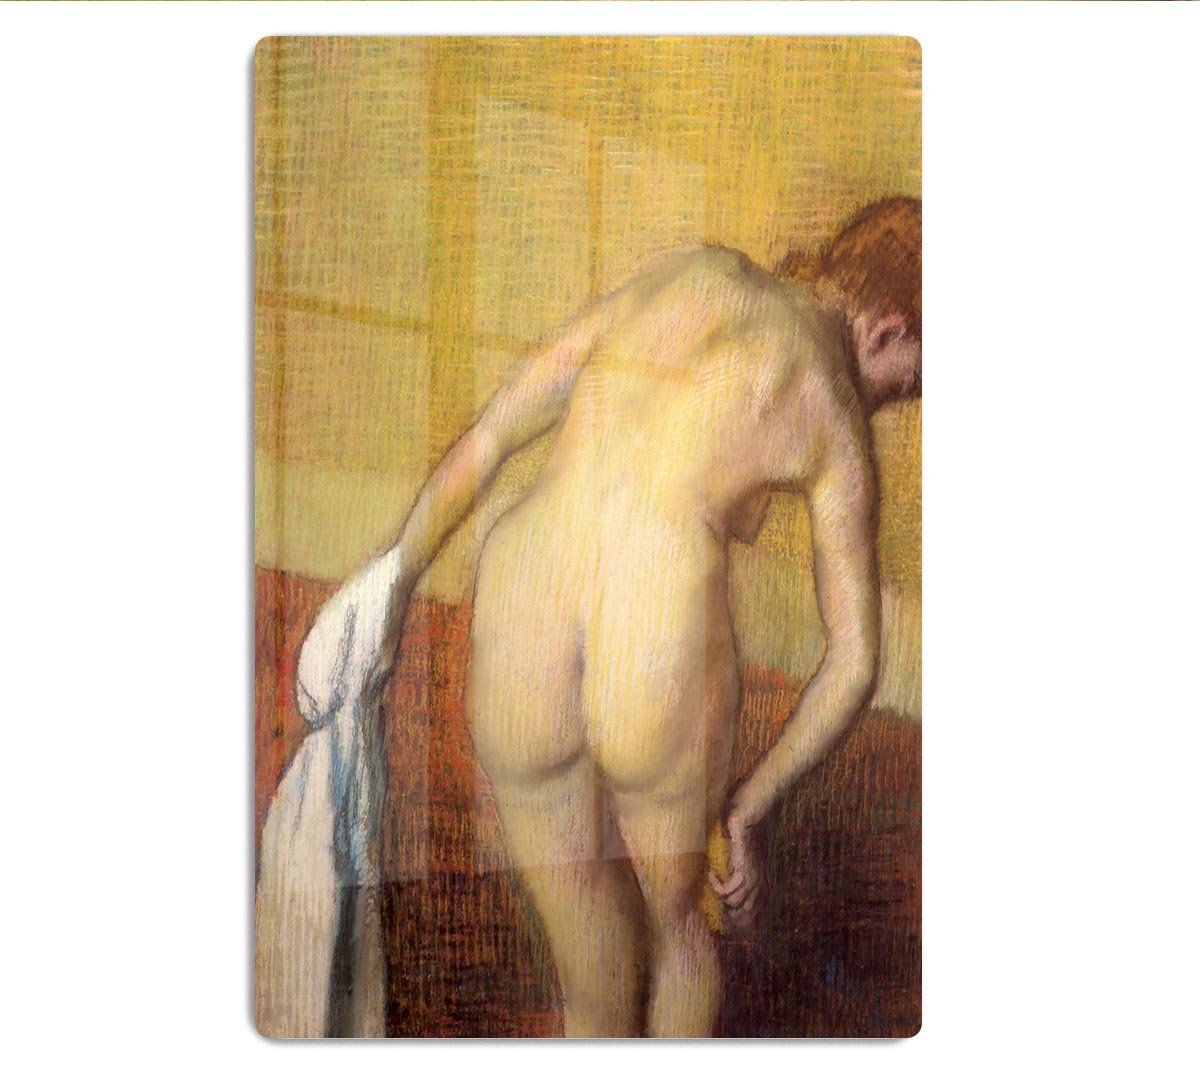 Woman Drying with towel and sponge by Degas HD Metal Print - Canvas Art Rocks - 1